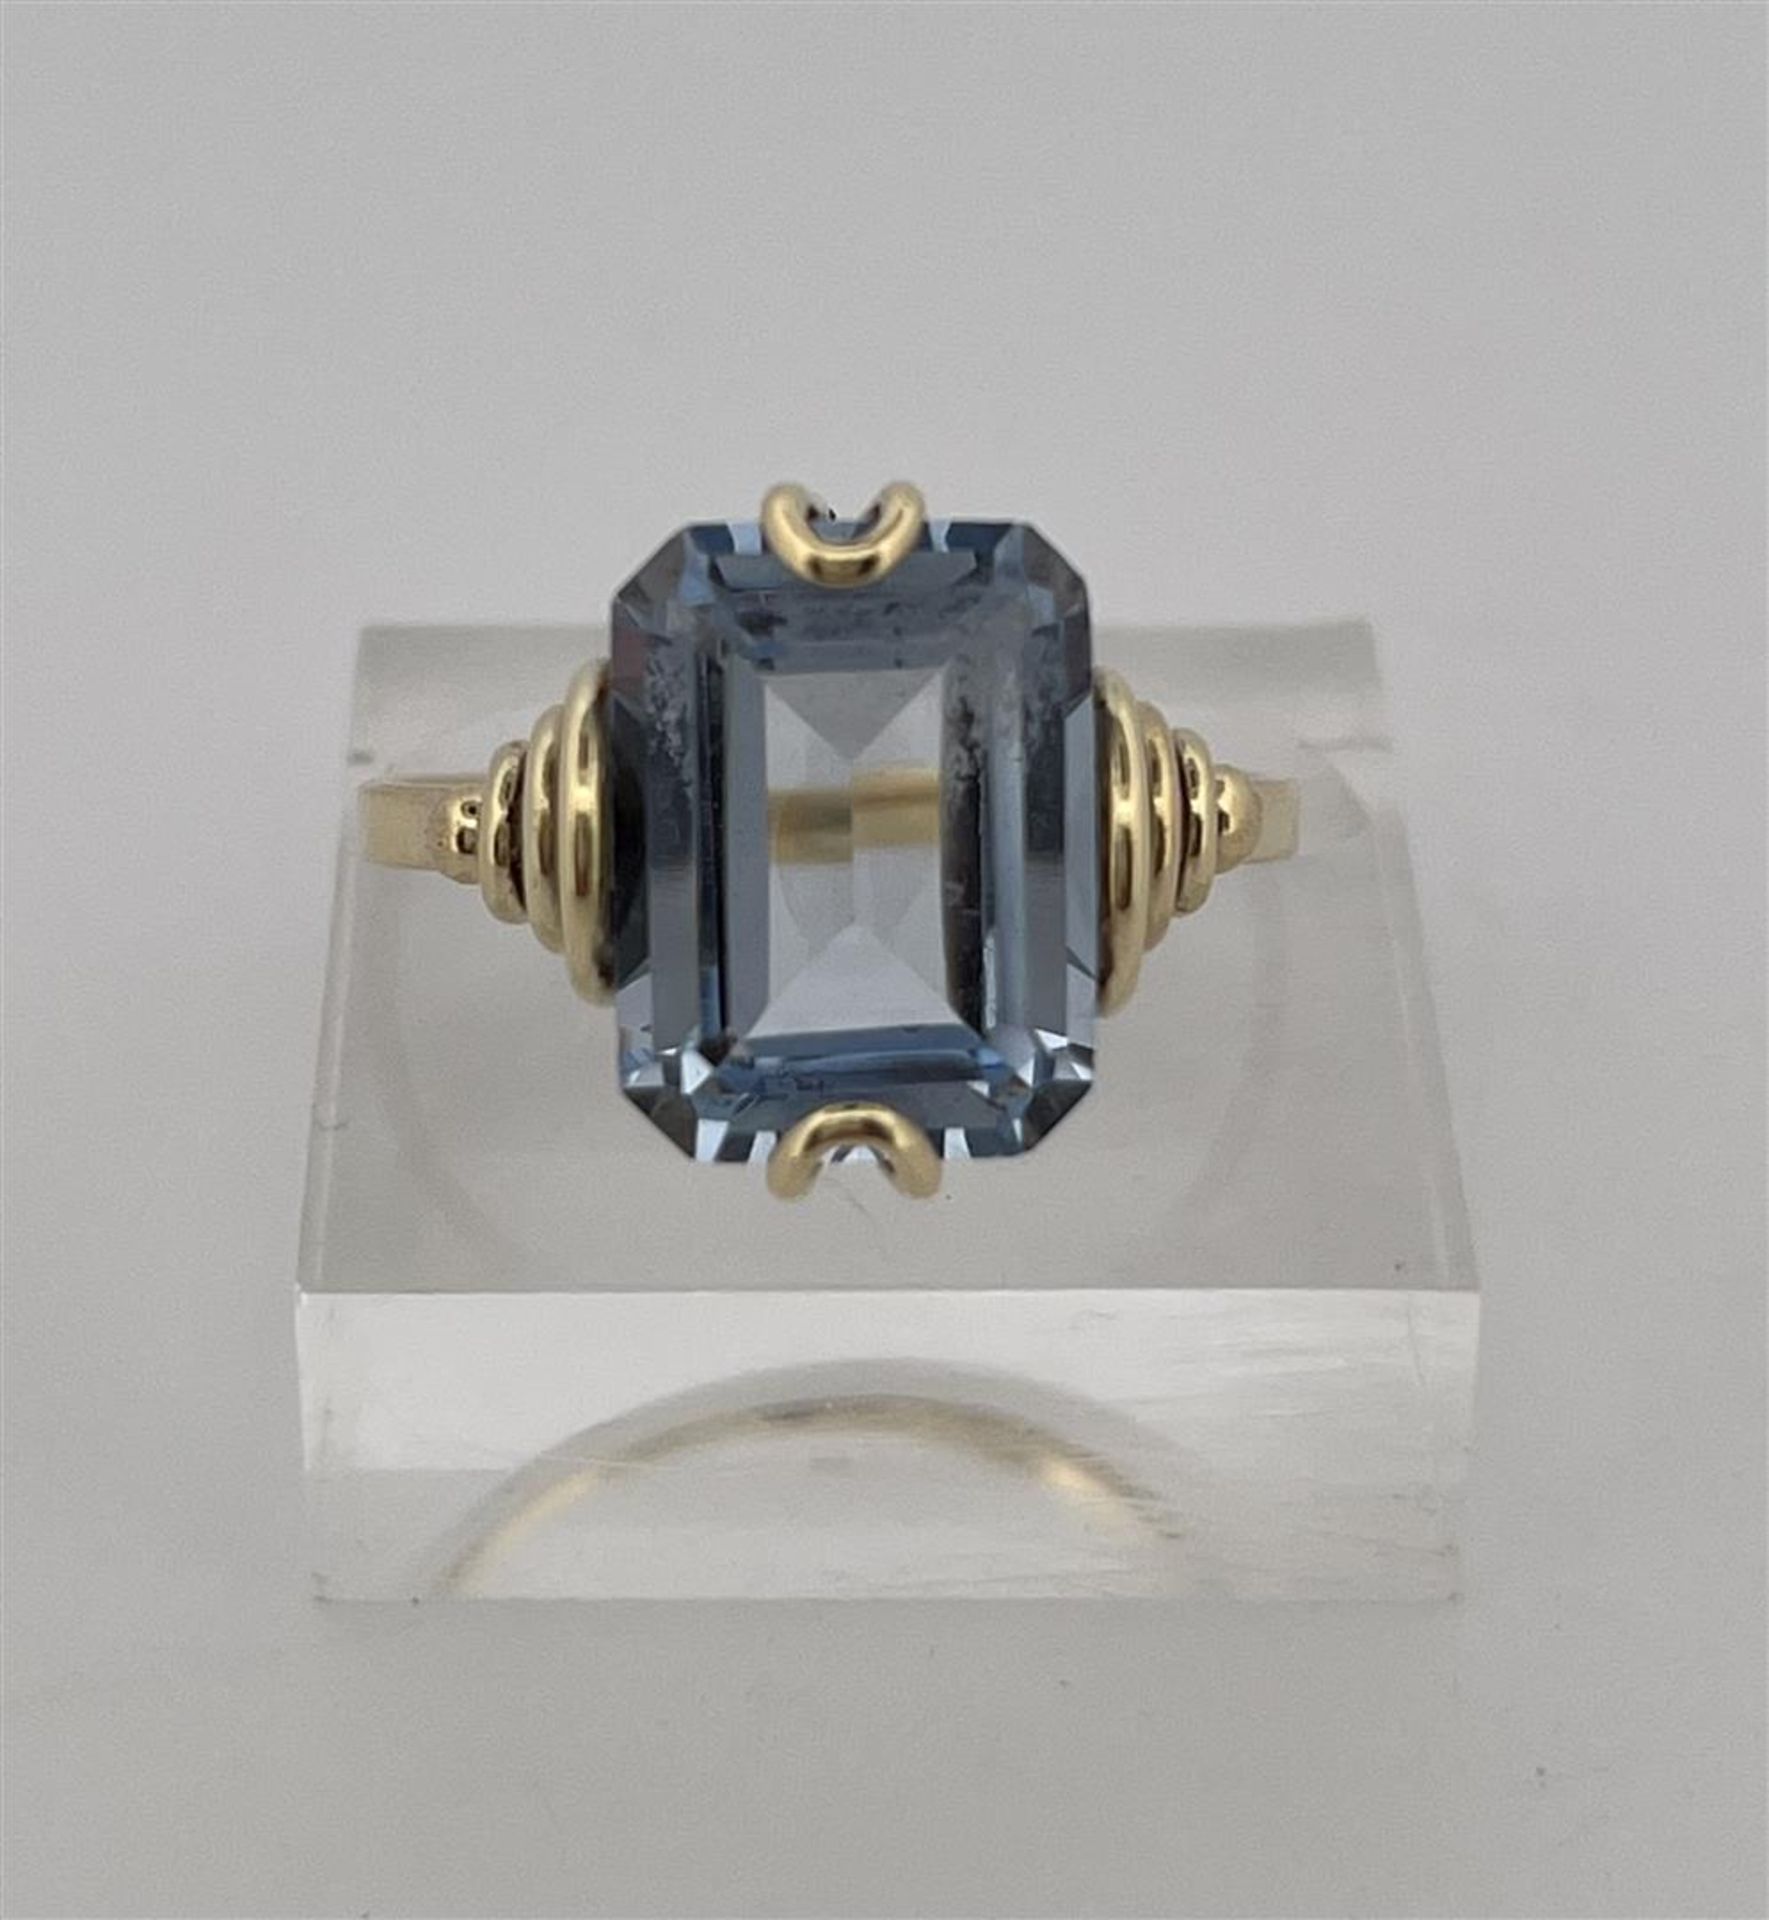 14kt yellow gold ring set with aquamarine.
The aquamarine isemerald cut measures approx. 11.8 x 8.9  - Image 7 of 11